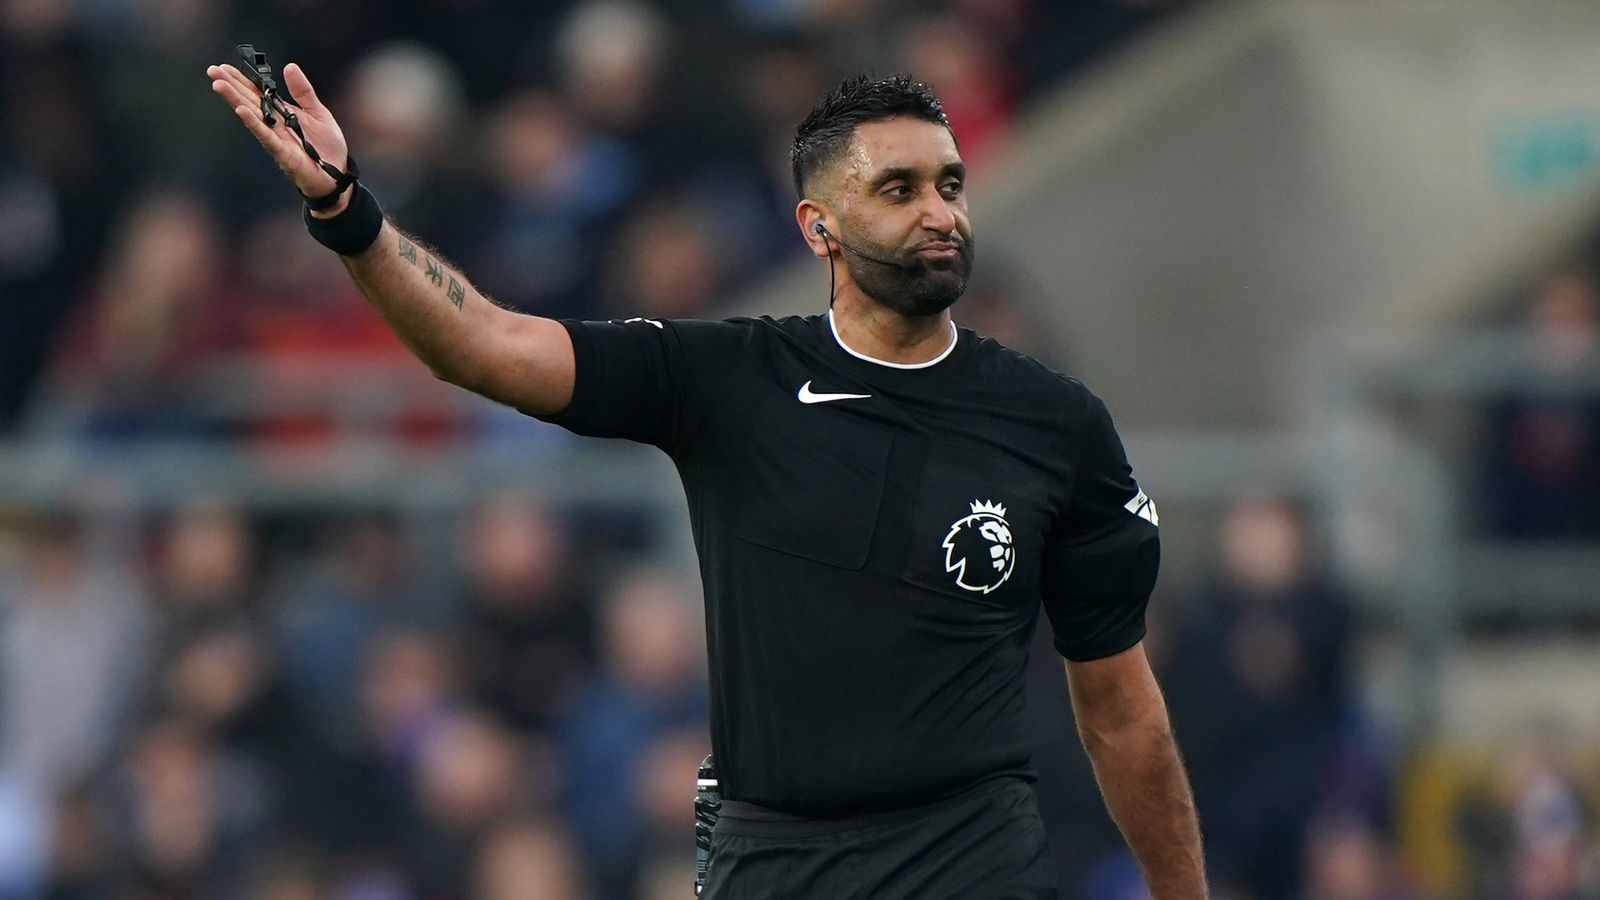 Sunny Singh Gill becomes first British South Asian to referee a Premier League game